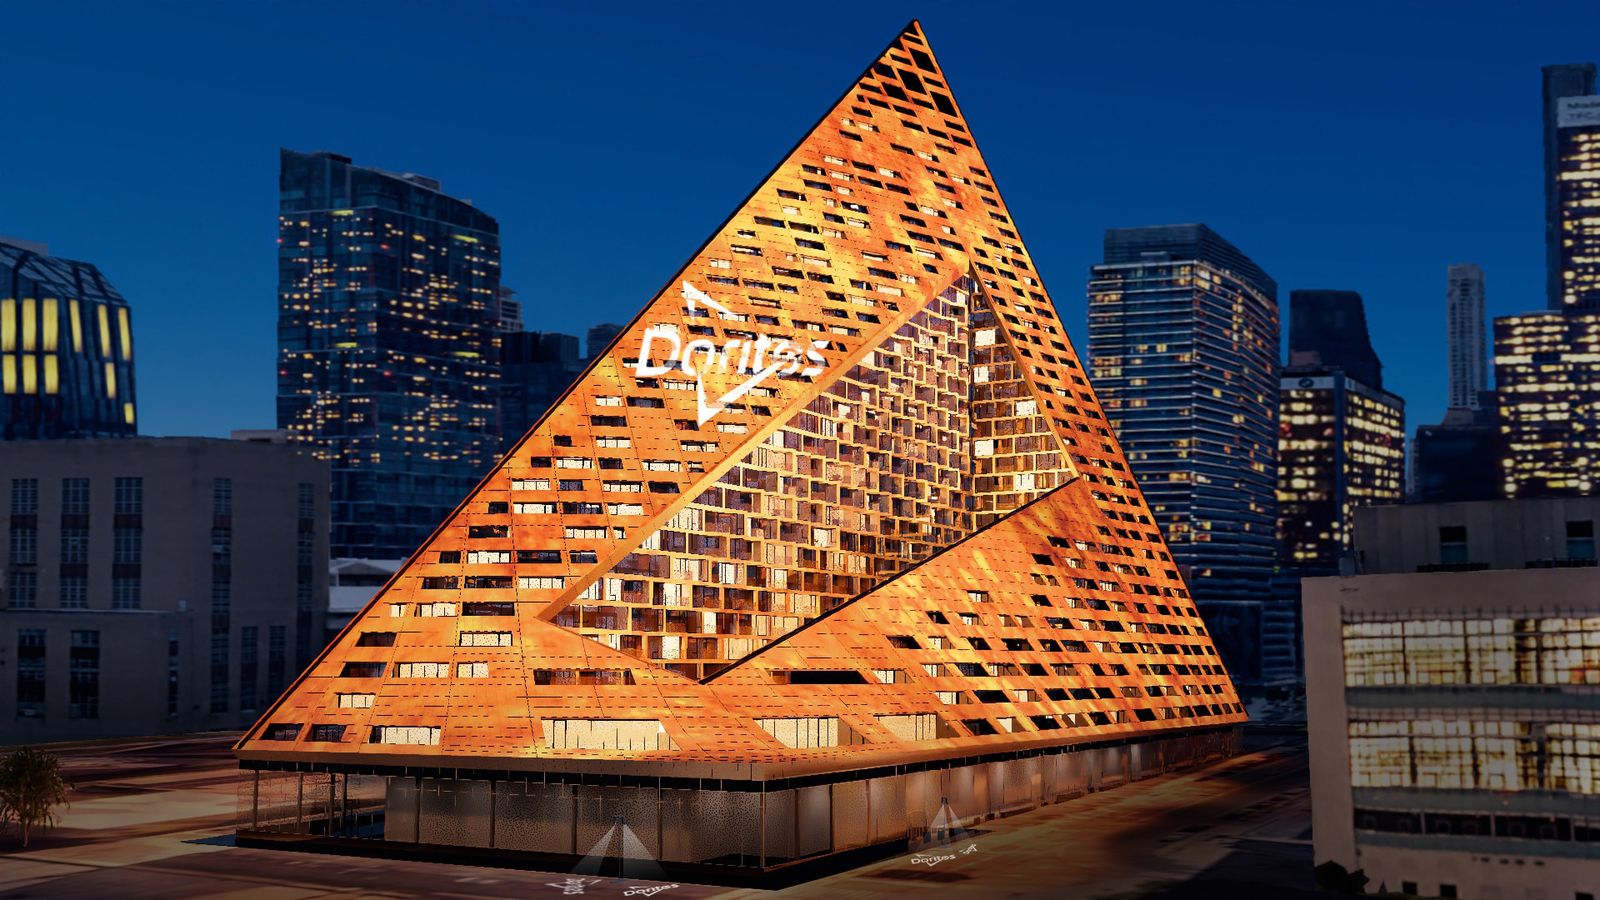 A building in New York City bears the Doritos branding as part of campaign inspired by the chip's shape.